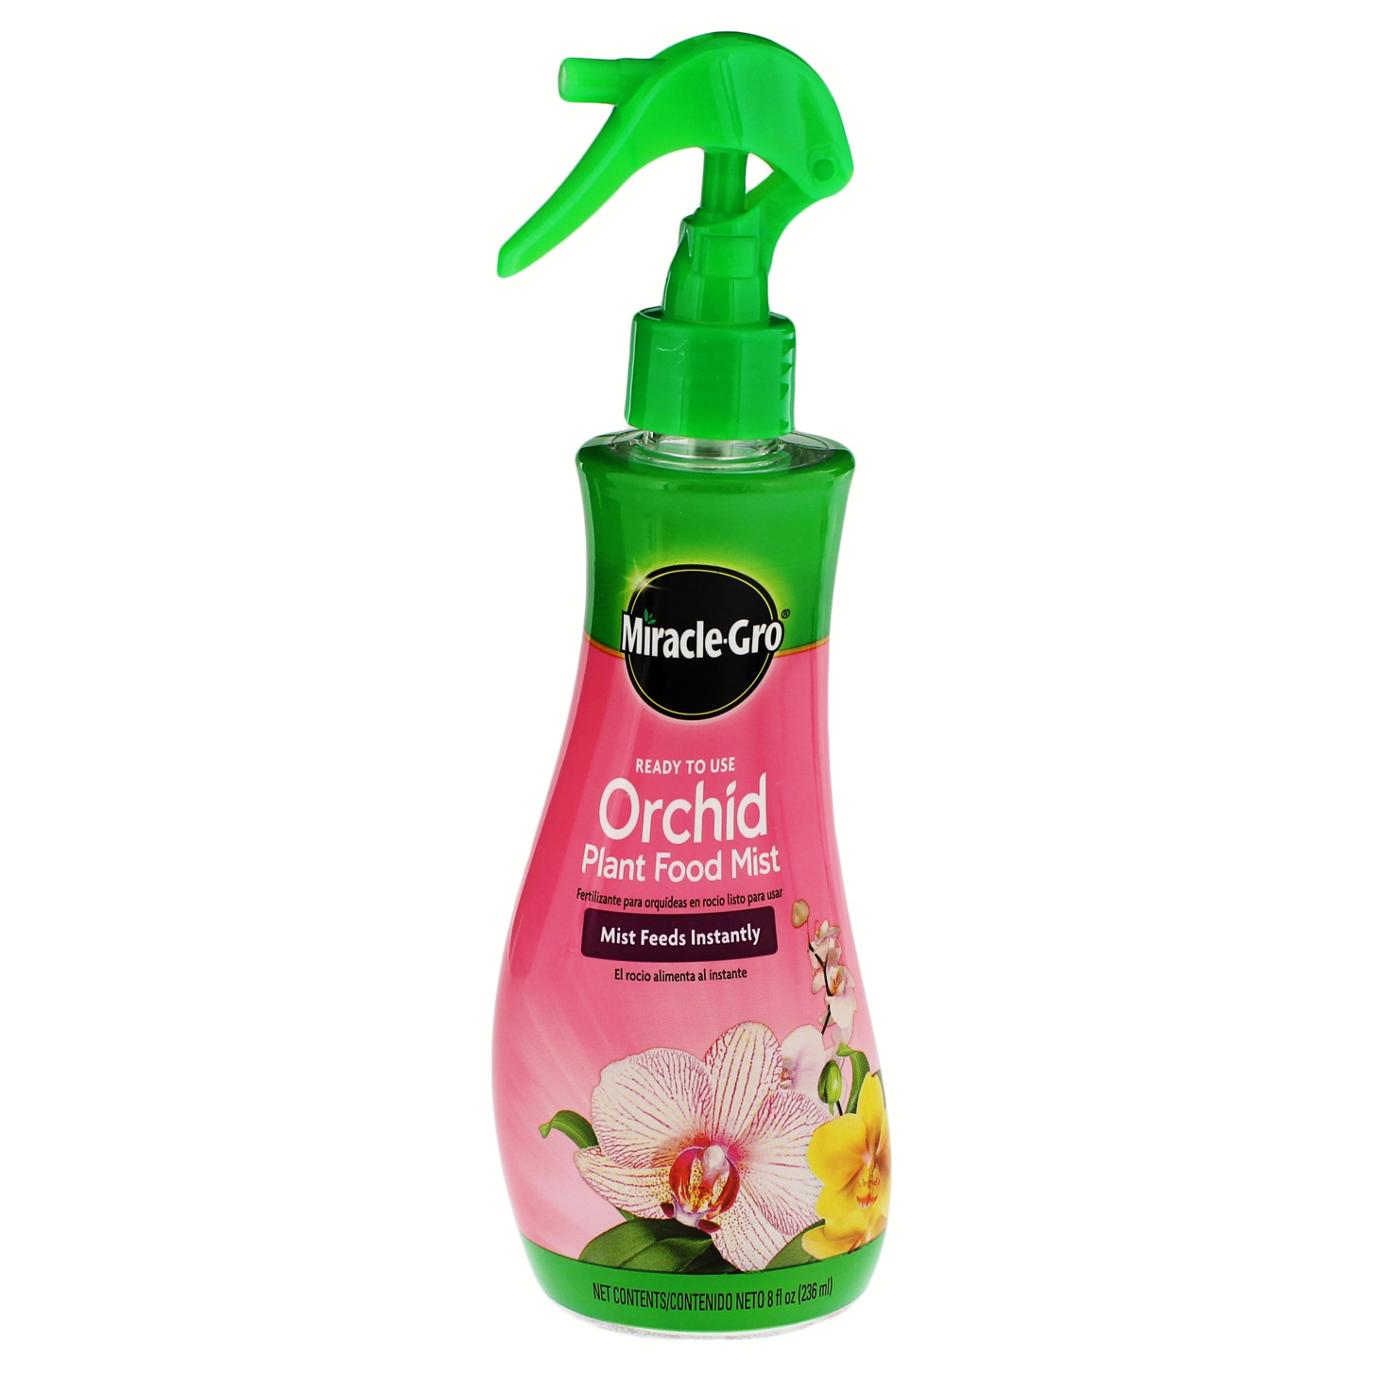 Miracle-Gro Ready-To-Use Orchid Plant Food Mist; image 1 of 2